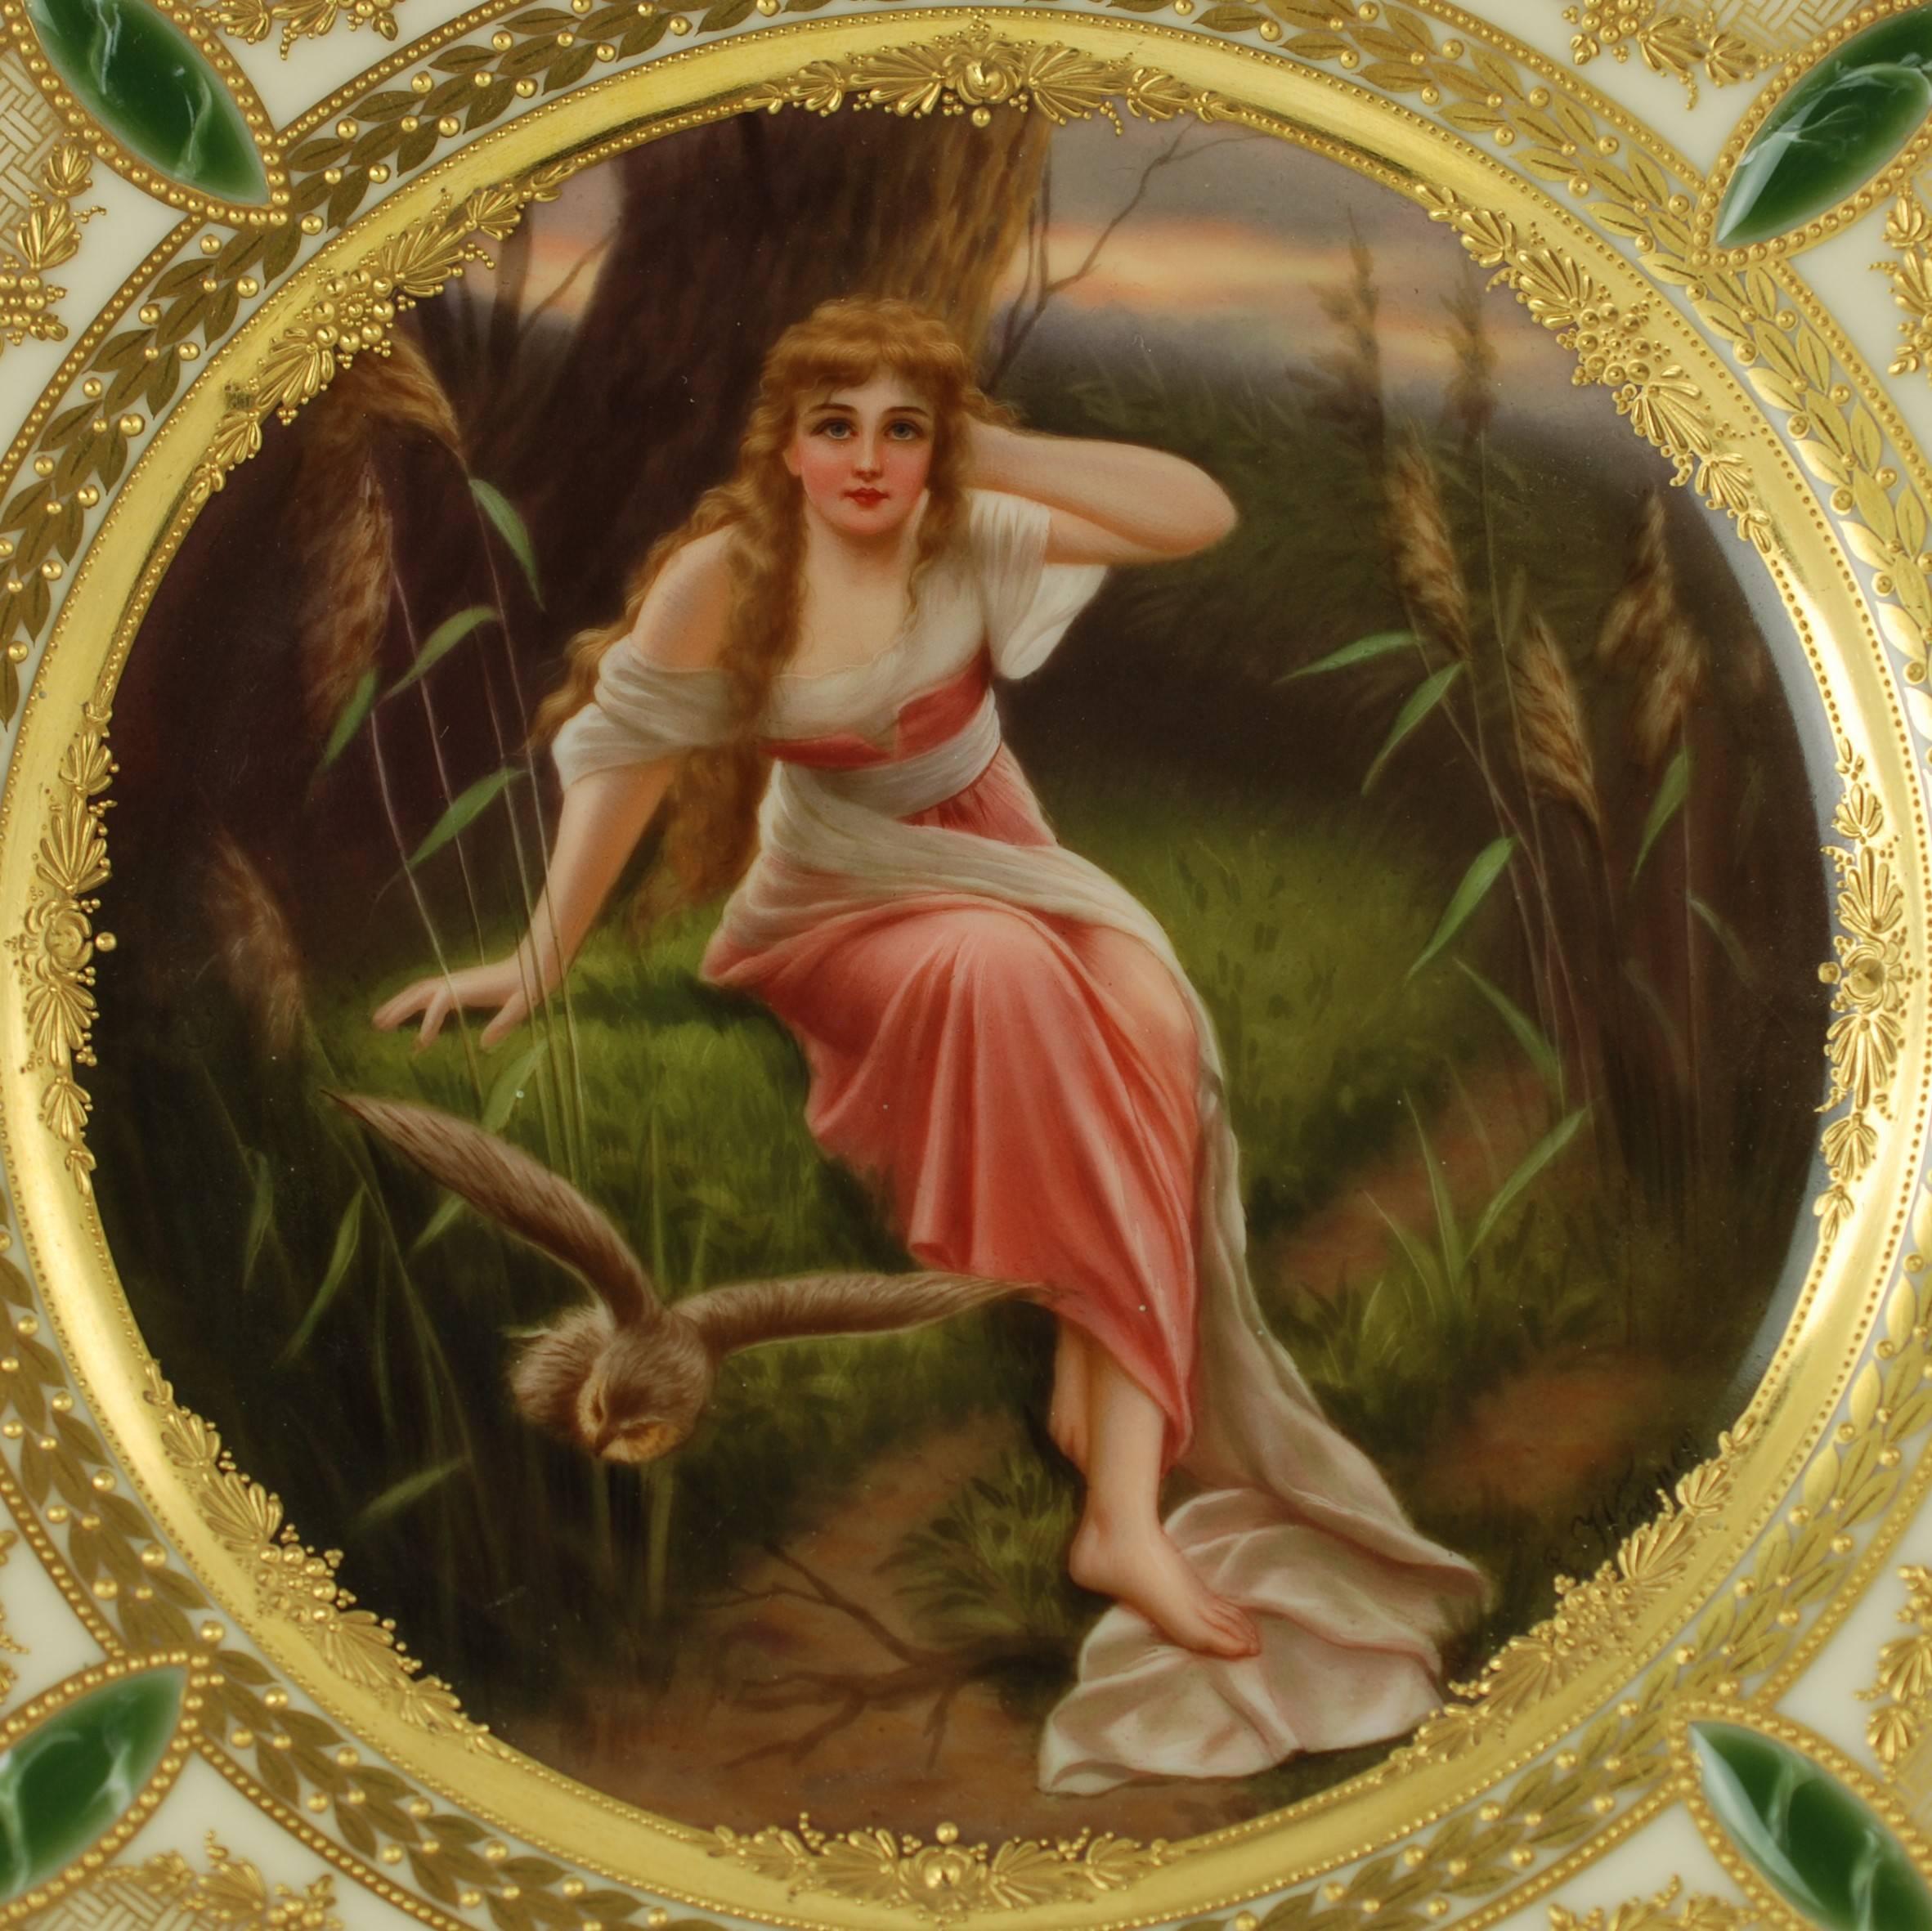 This beautifully decorated 19th century hand-painted Royal Vienna Porcelain cabinet plate is titled Märchen which translates from German as Fairy Tale. The piece has been signed by Wagner and depicts a forest scene featuring a young woman seated on